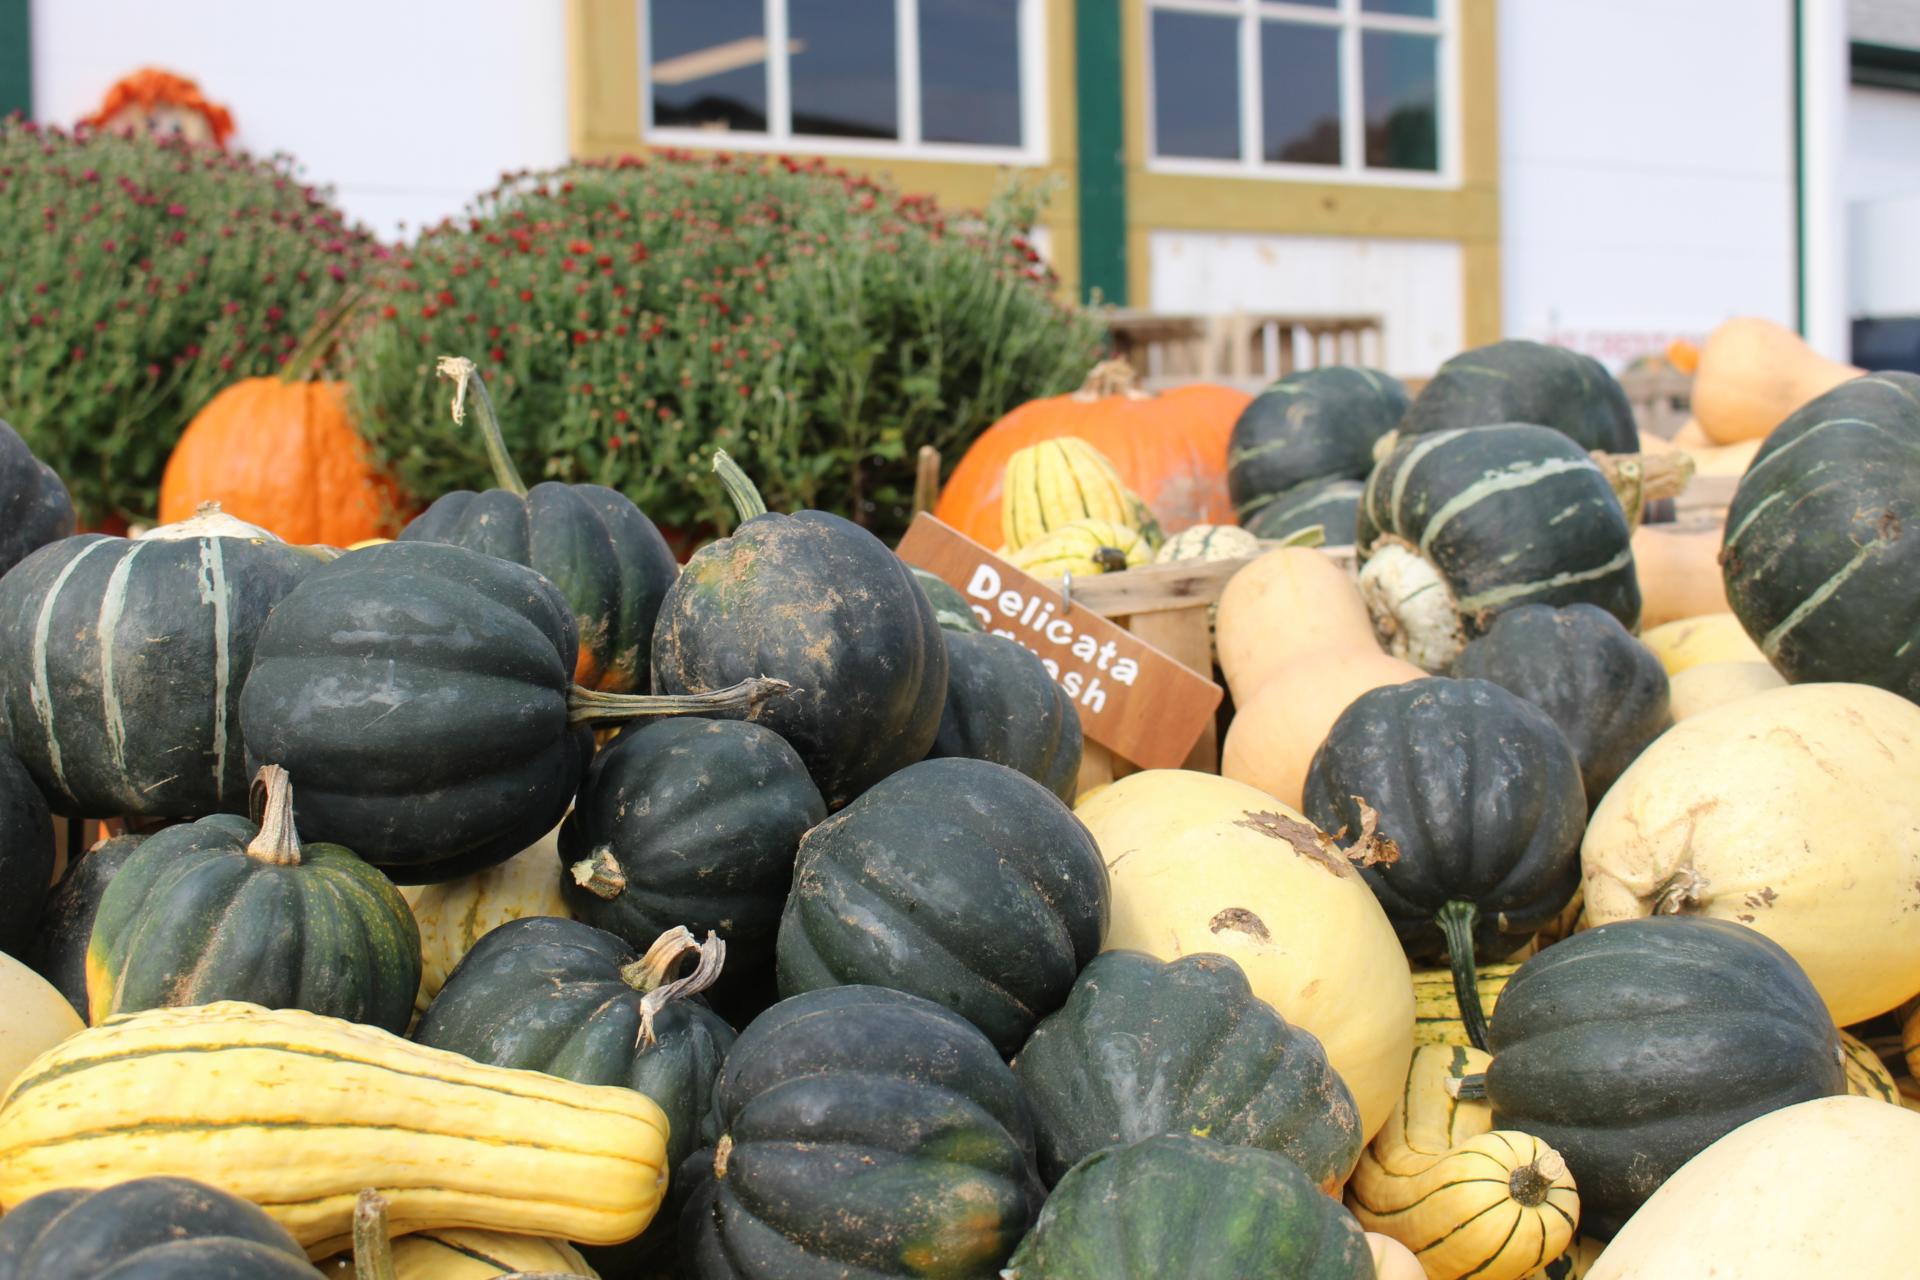 LOCAL: Apple Picking and Pumpkin Patching at Riamede Farm